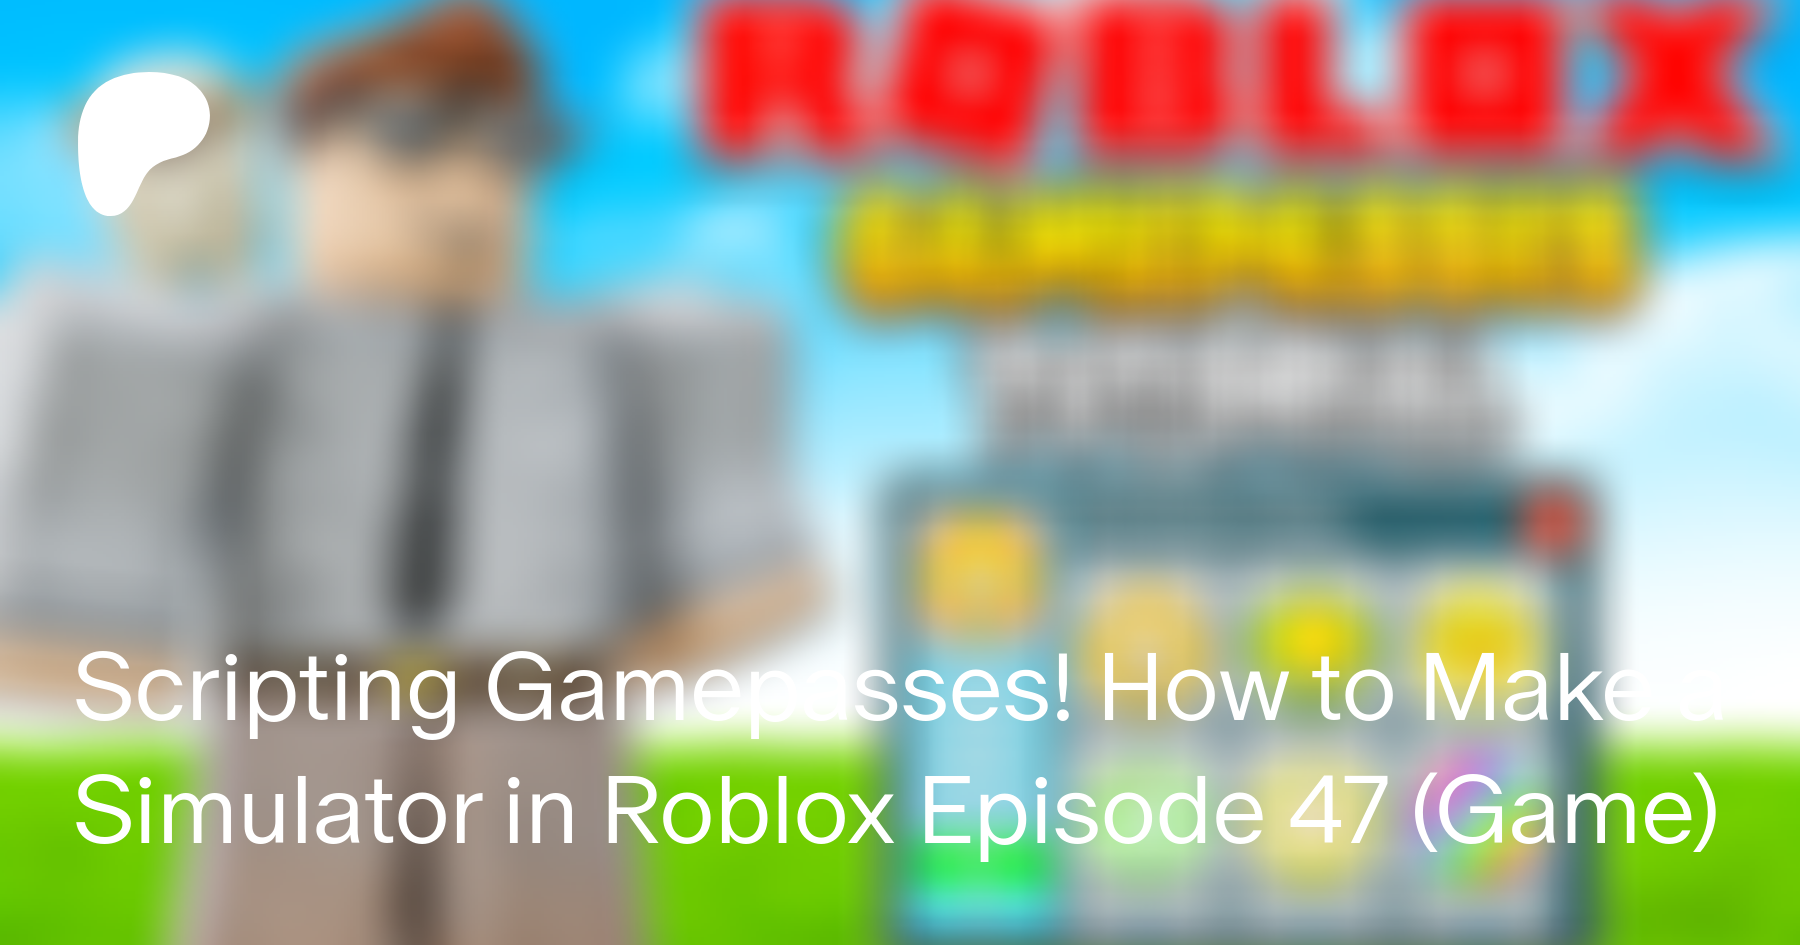 How to Make a Gamepass on Roblox